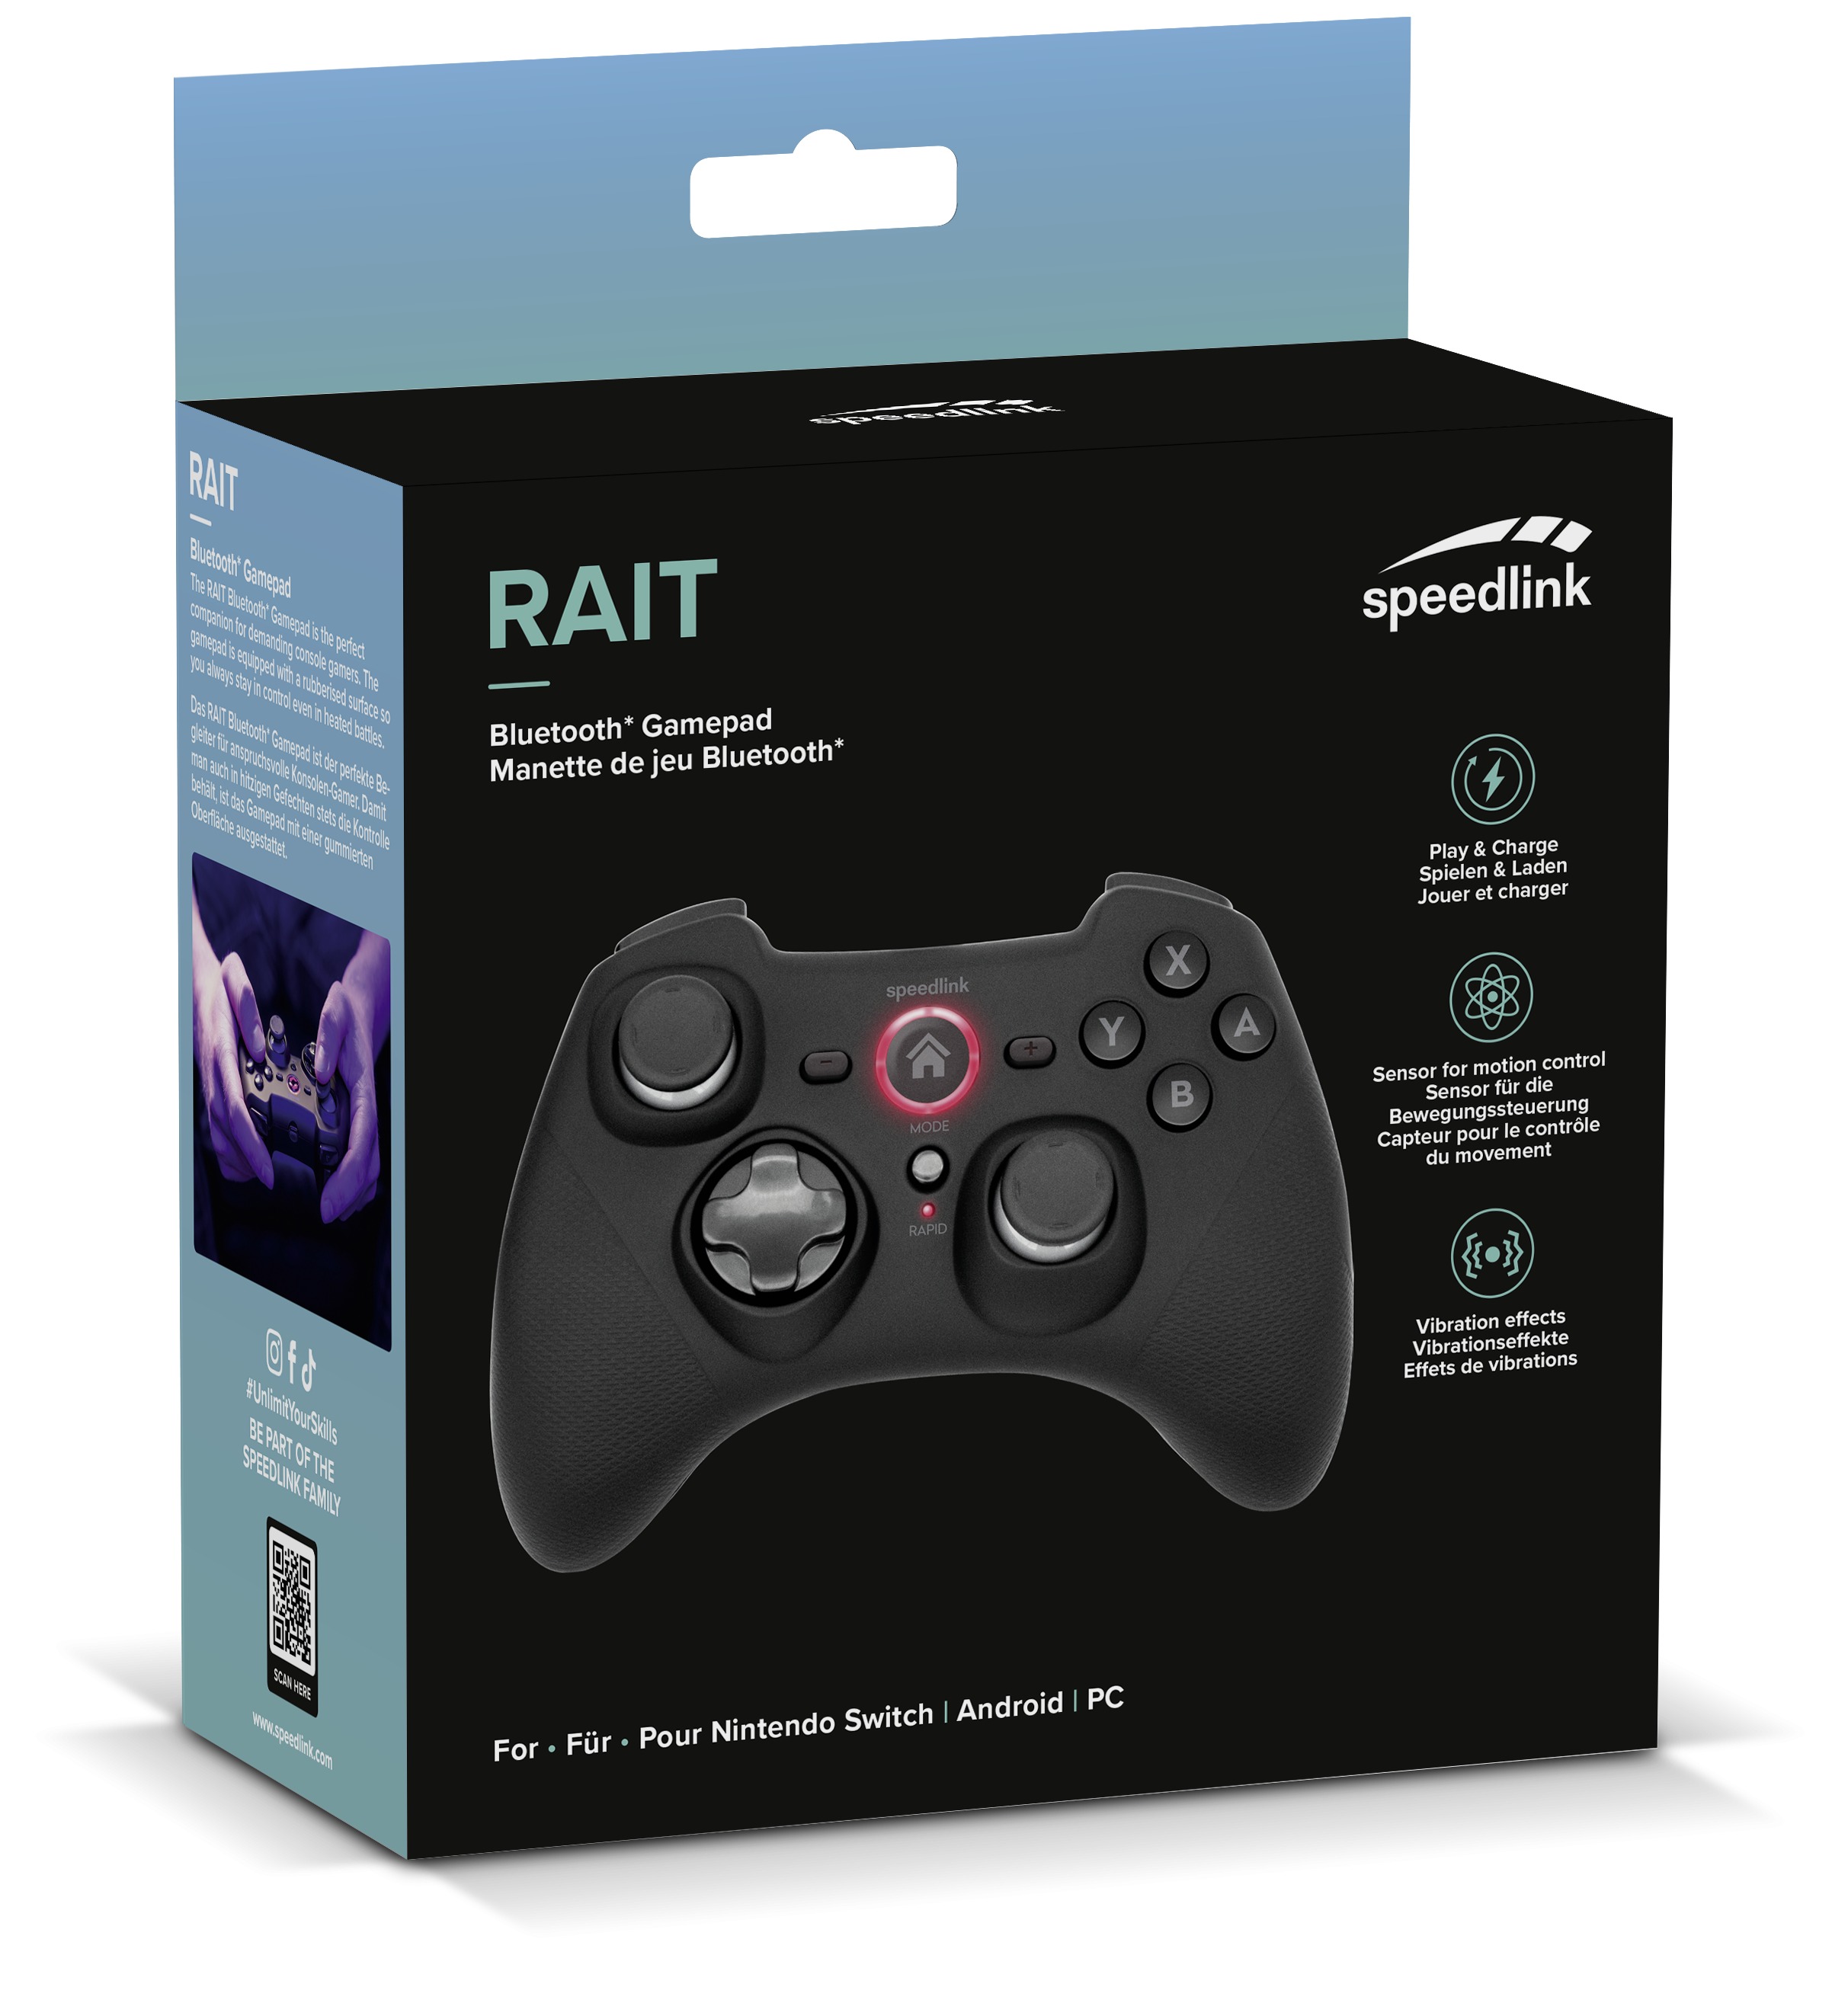 Gamepad Nintendo for - RAIT SL-330402-RRBK rubber-black | Switch/OLED/PC/Android, Bluetooth